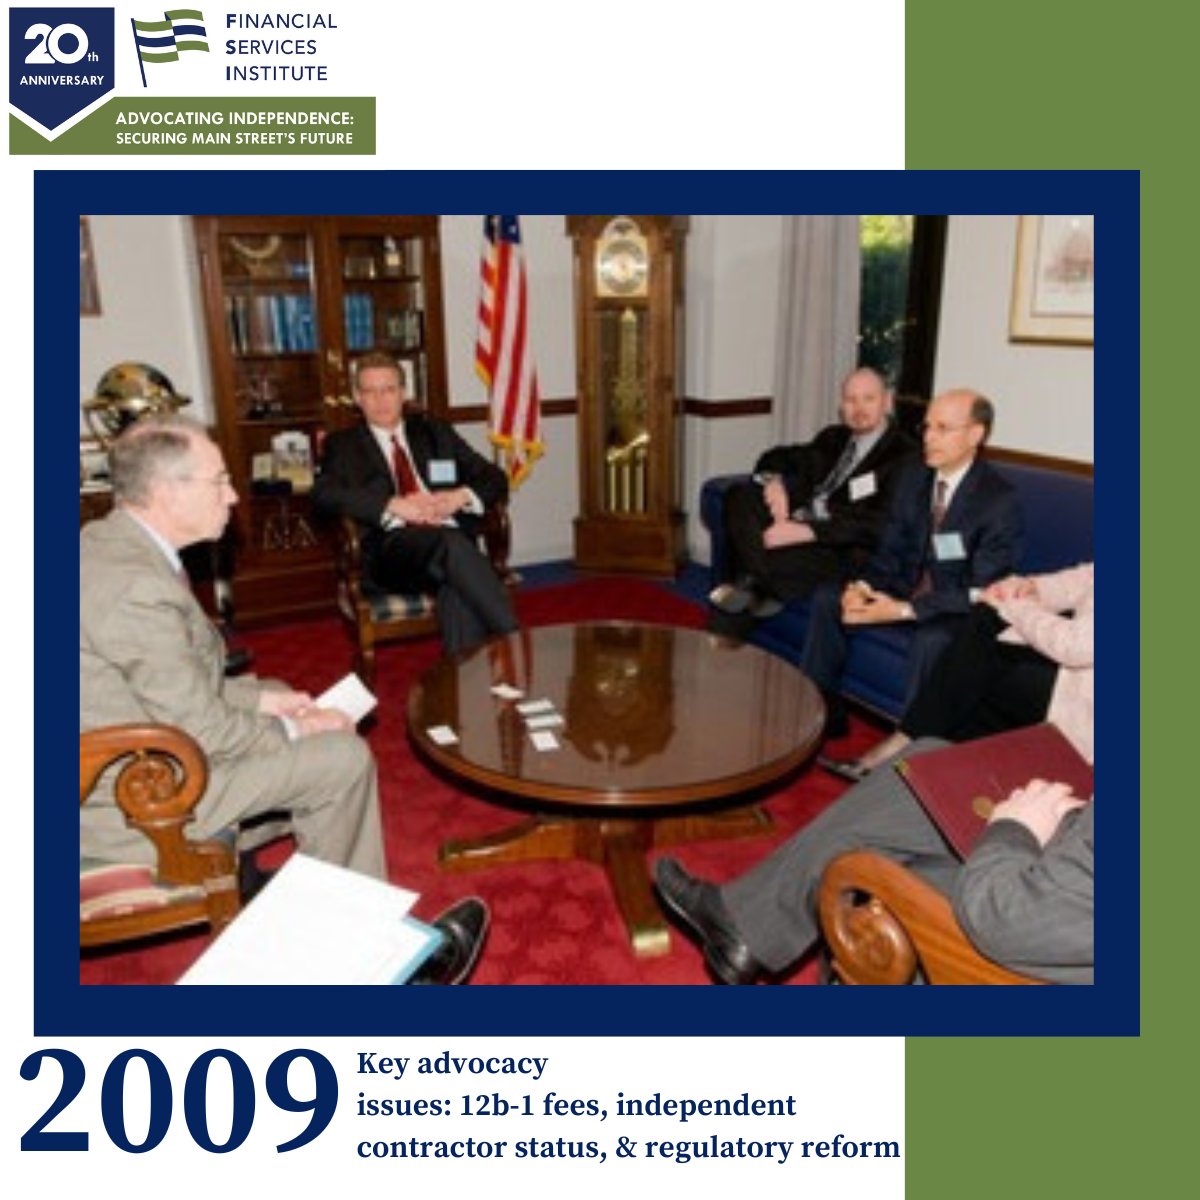 Take a look back at our accomplishments over the last two decades! In 2009, FSI advocated for several key issues such as 12b-1 fees, independent contractor status & regulatory reform.#20YearsofFSI #20thanniversary